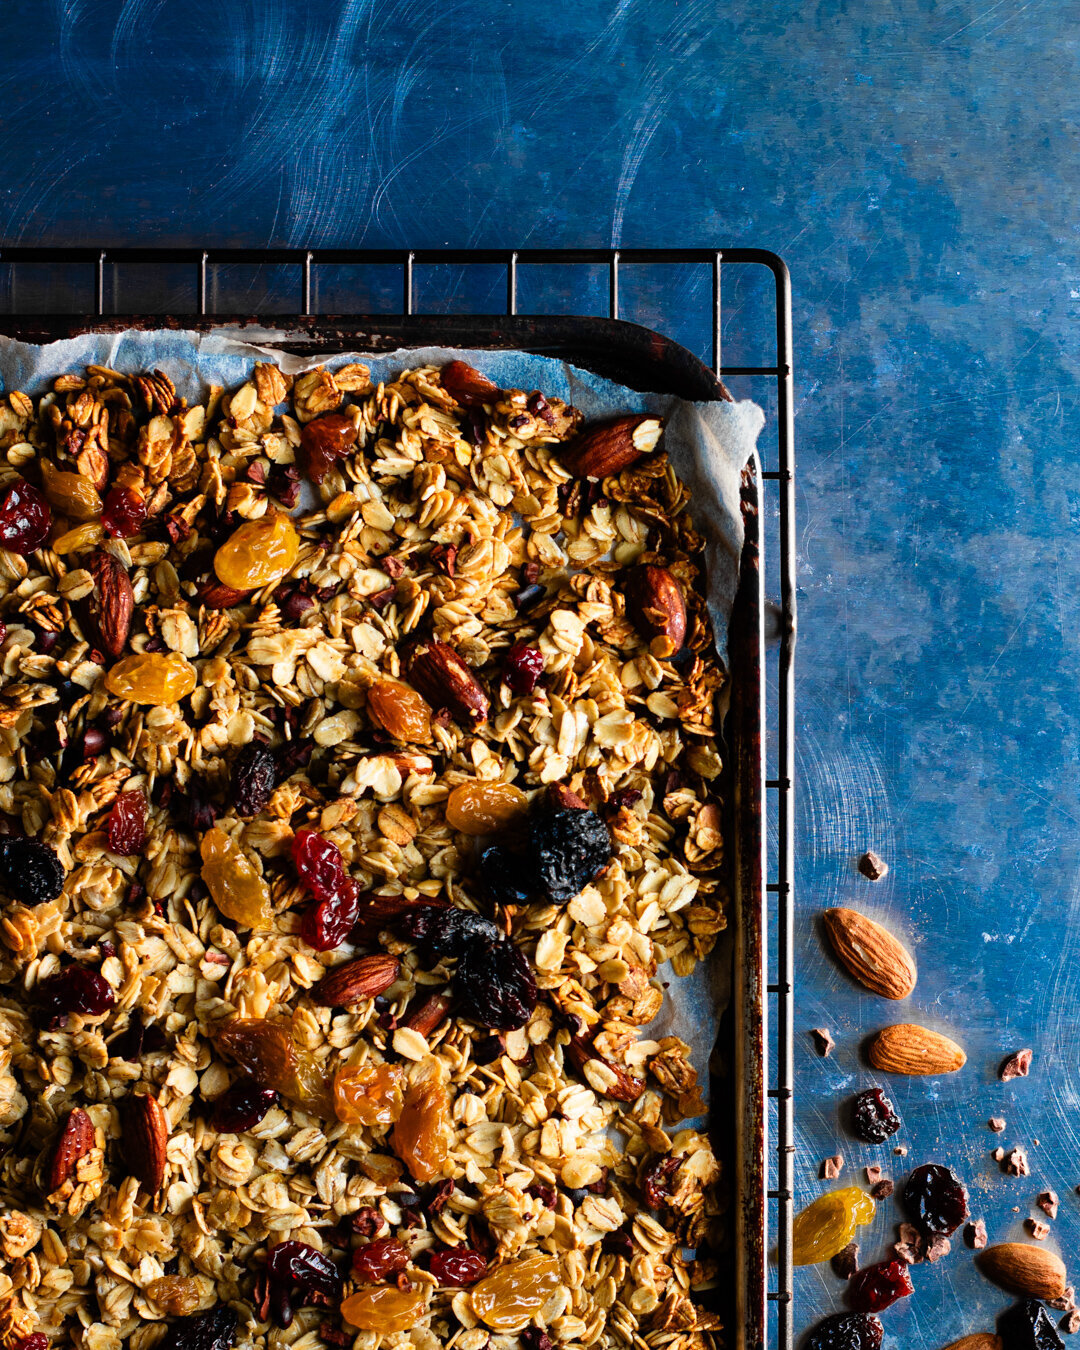 Tray of baked granola with almonds, honey and flame raisins